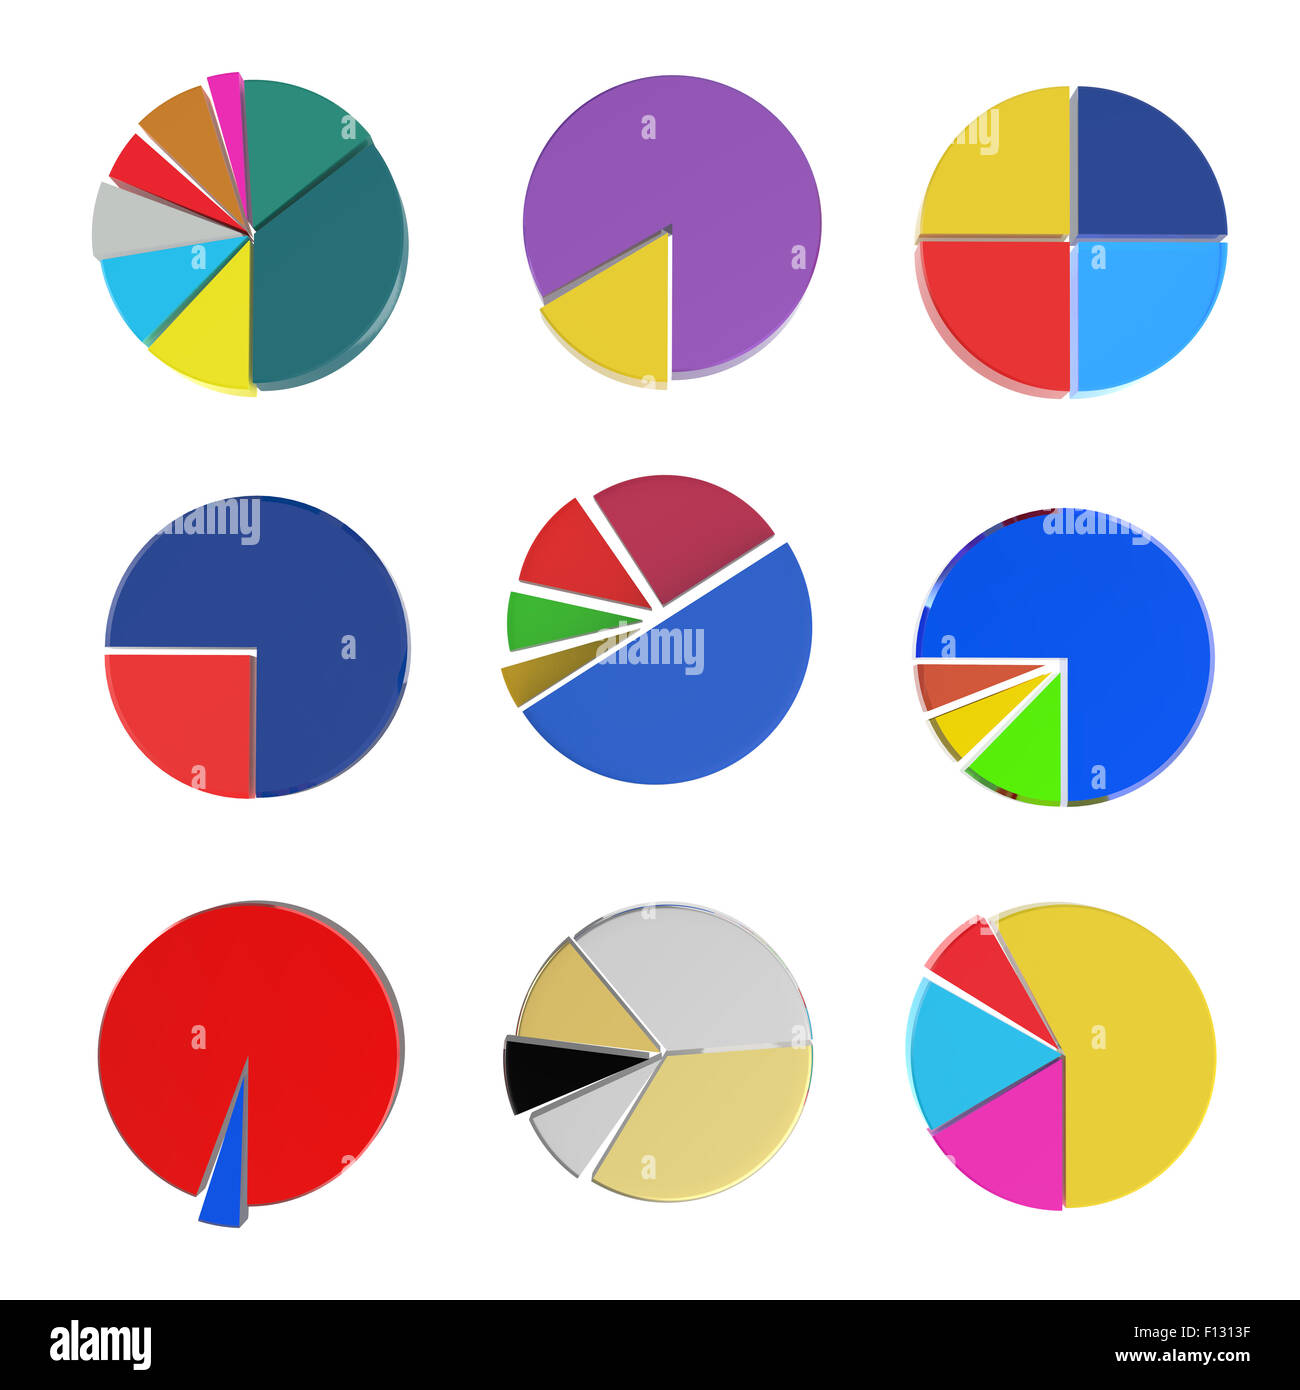 Different Pie Charts